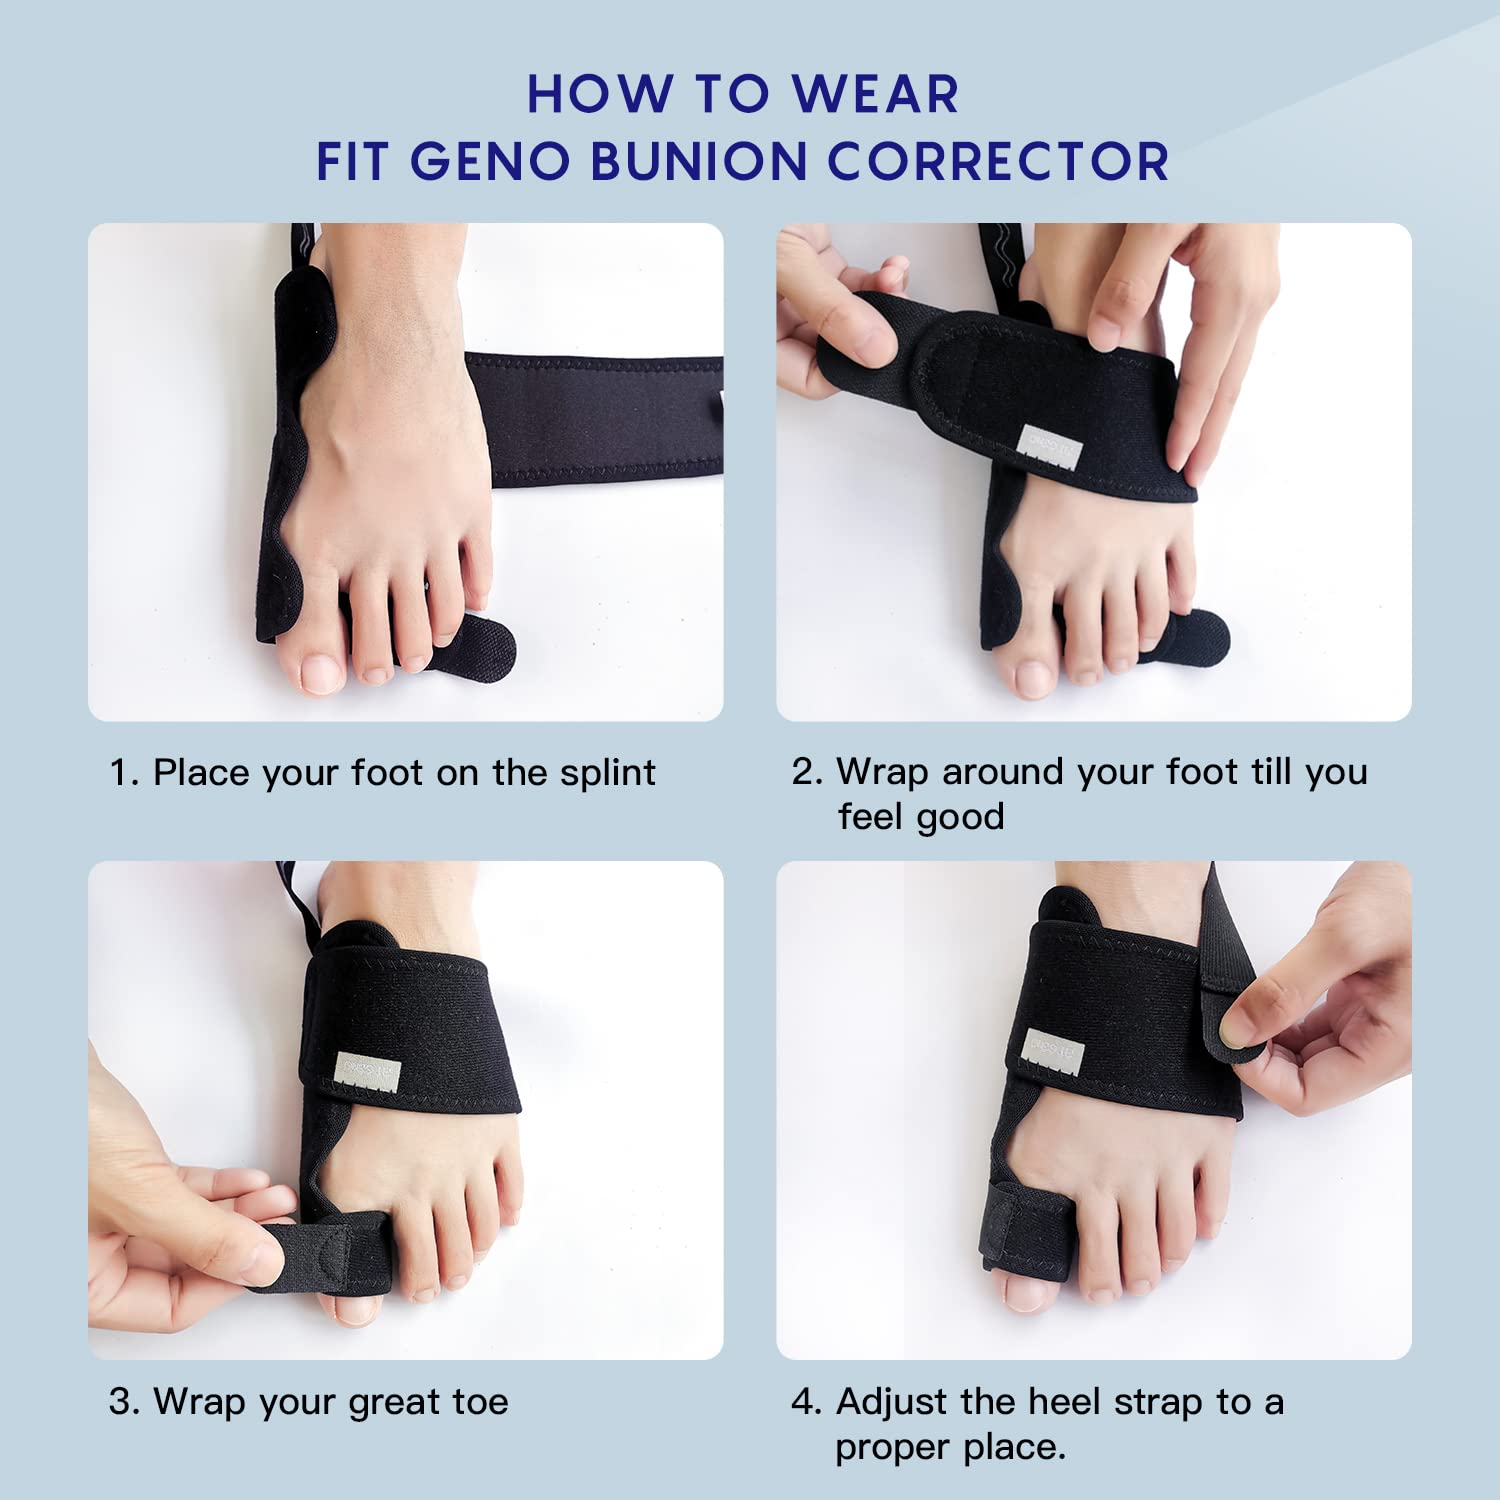 Fit Geno on X: There are a few simple steps to follow when putting on  Fitgeno Bunion Corrector. Follow these guides to get the best result out of  your bunion corrector! 👍😉